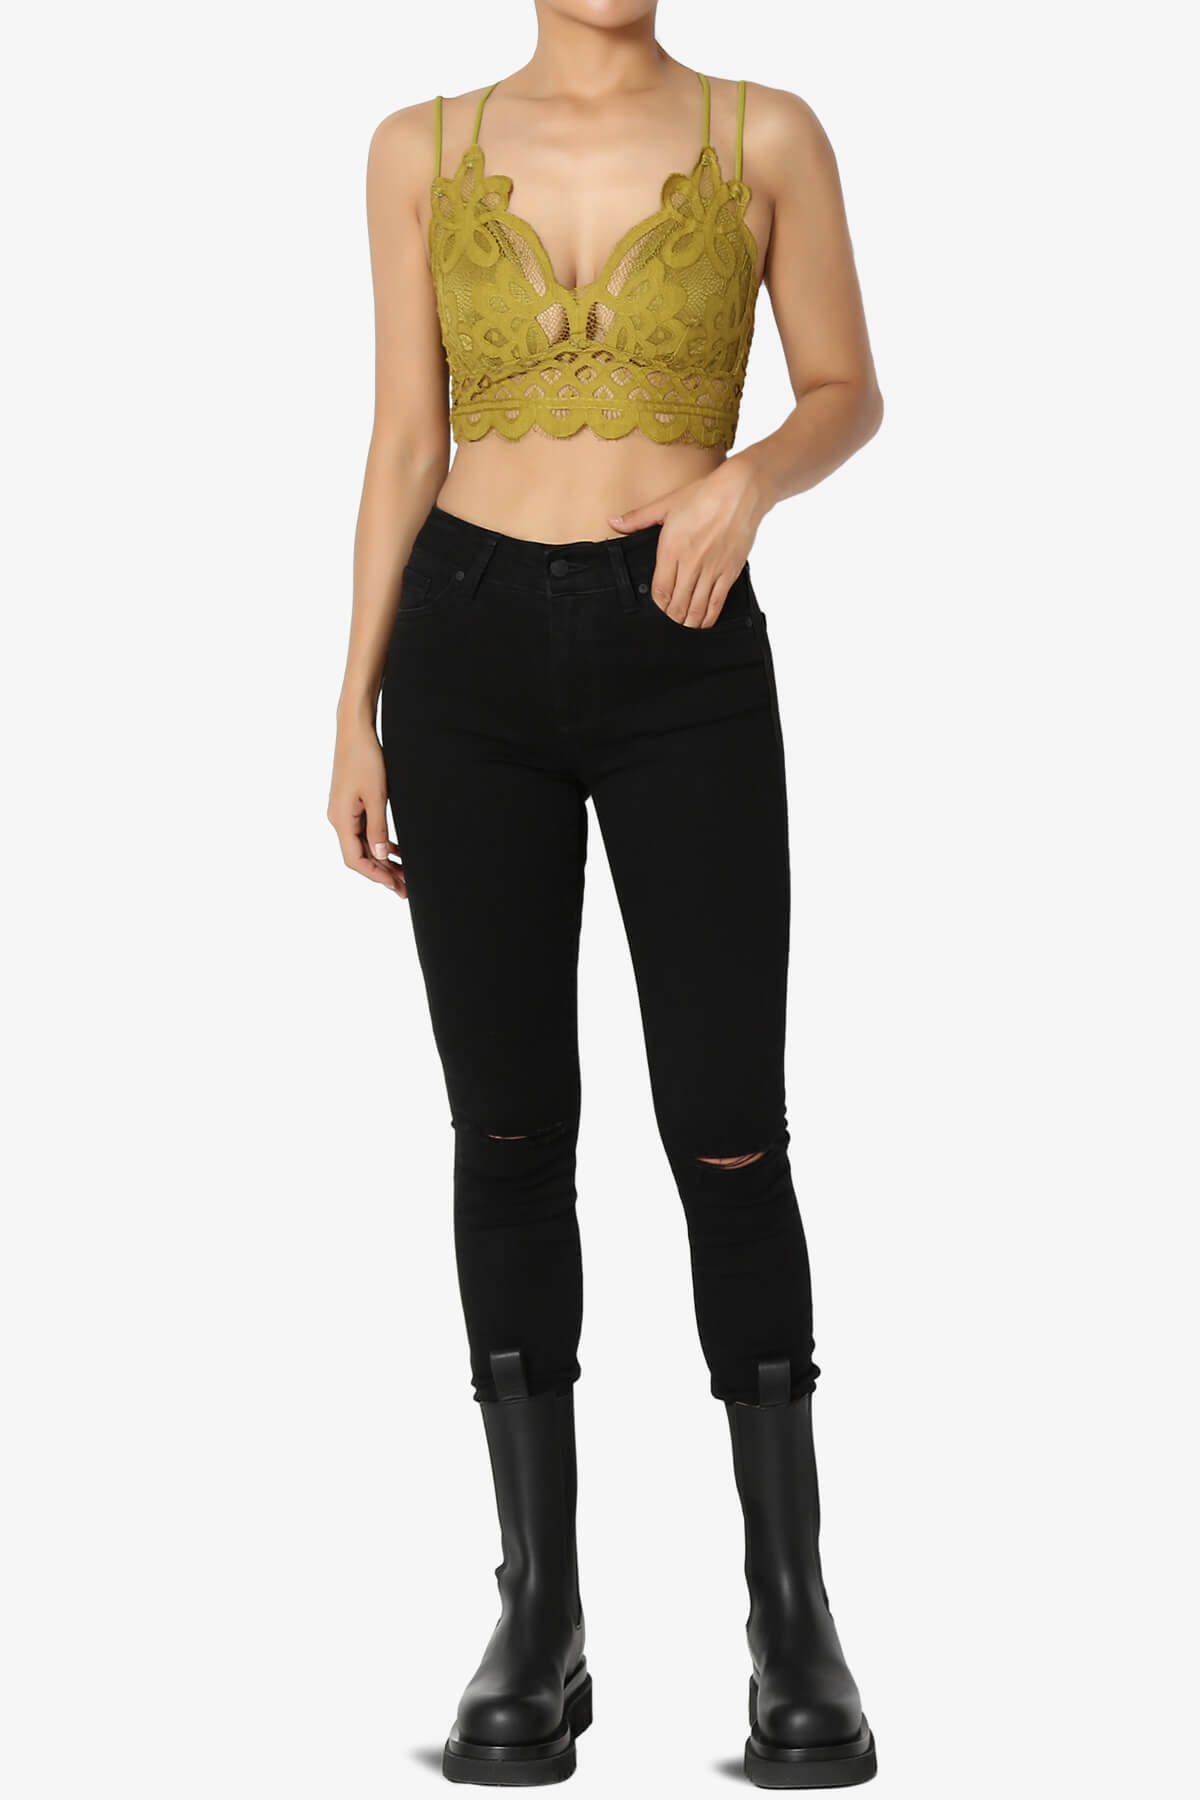 Load image into Gallery viewer, Adella Crochet Lace Bralette OLIVE MUSTARD_6
